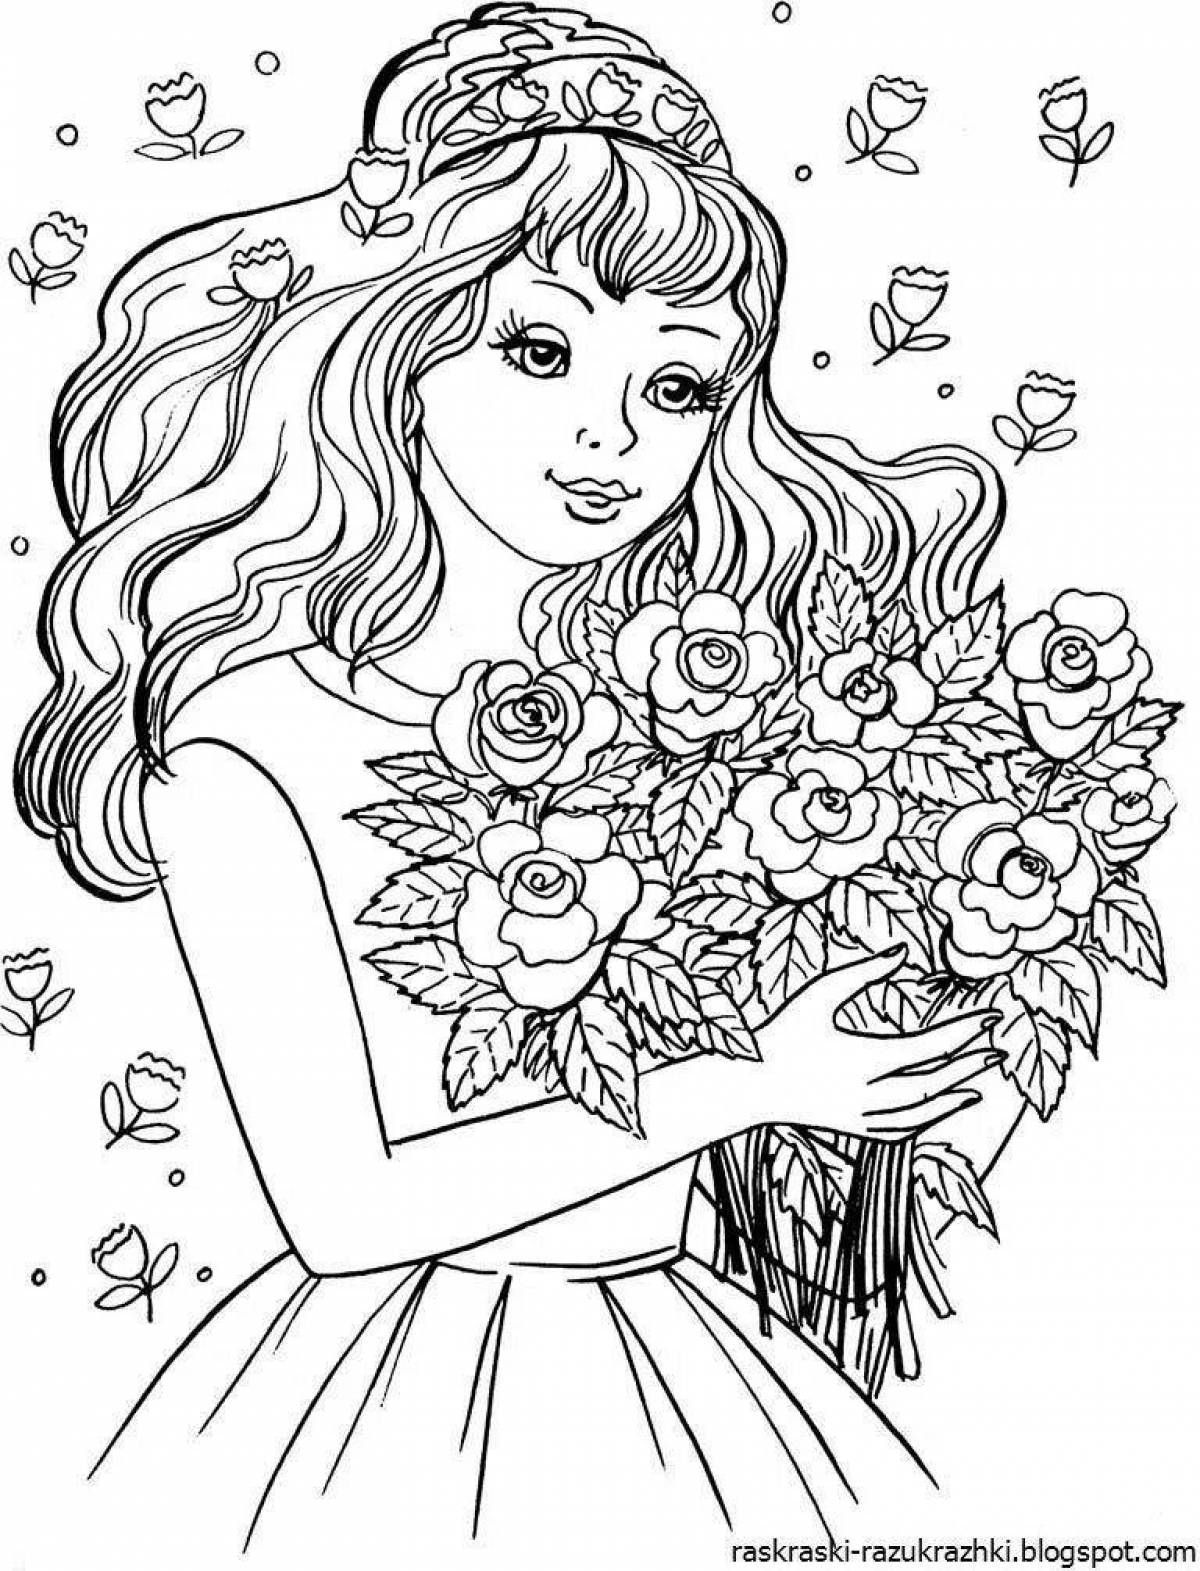 Coloring for girls pdf